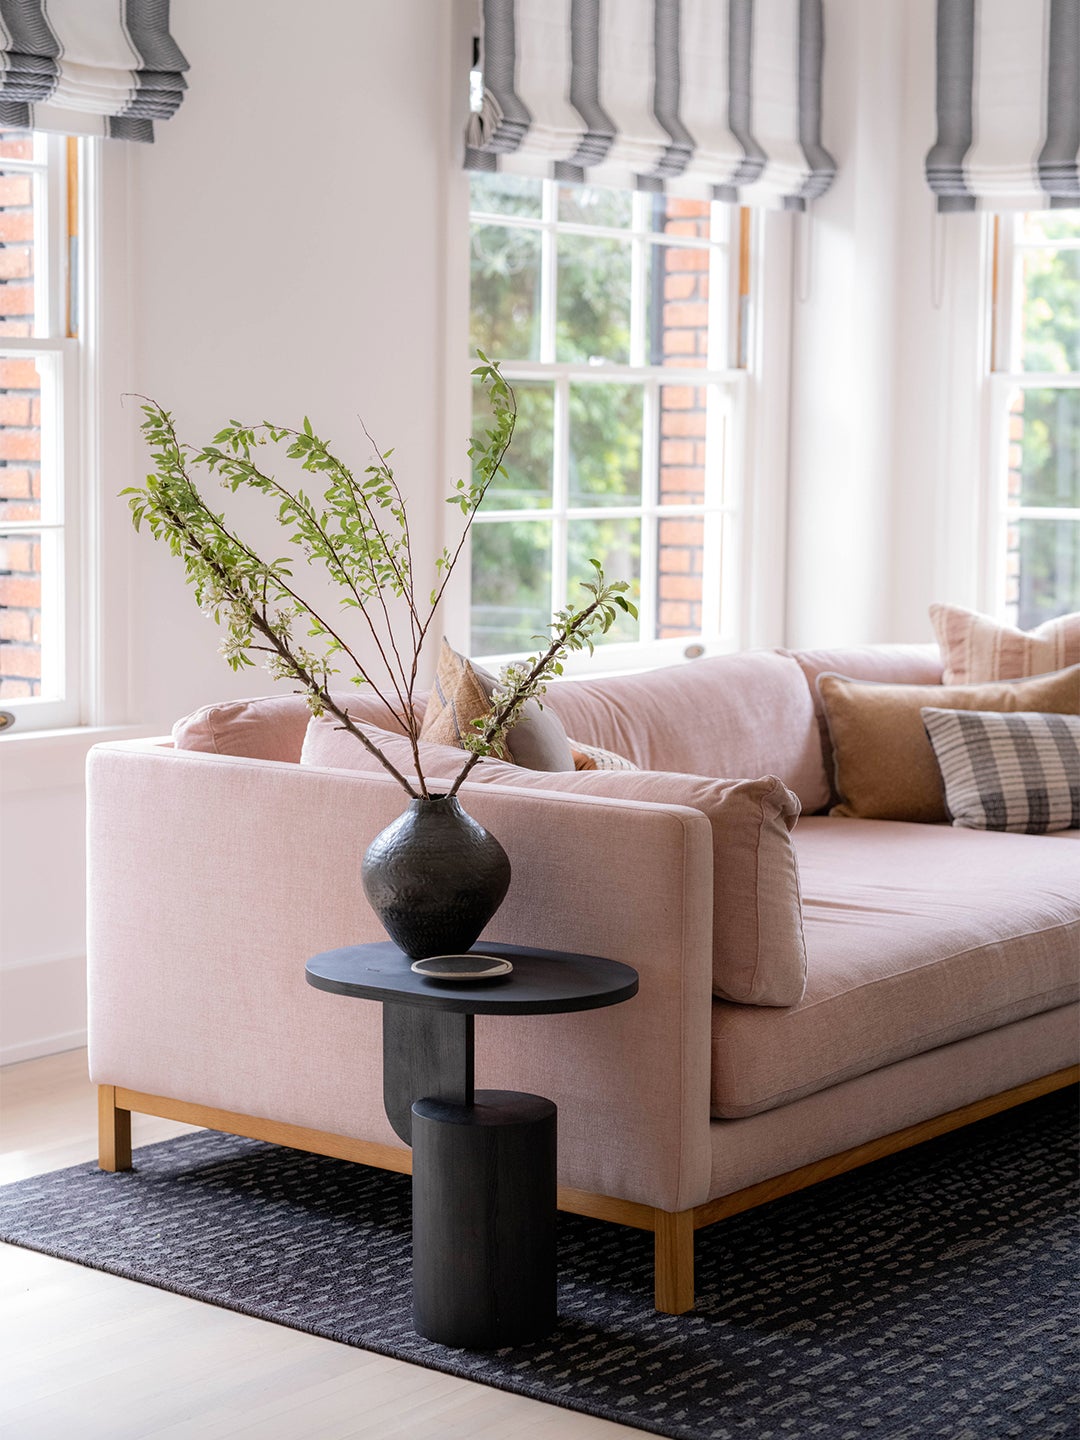 Pink sofa with black side table